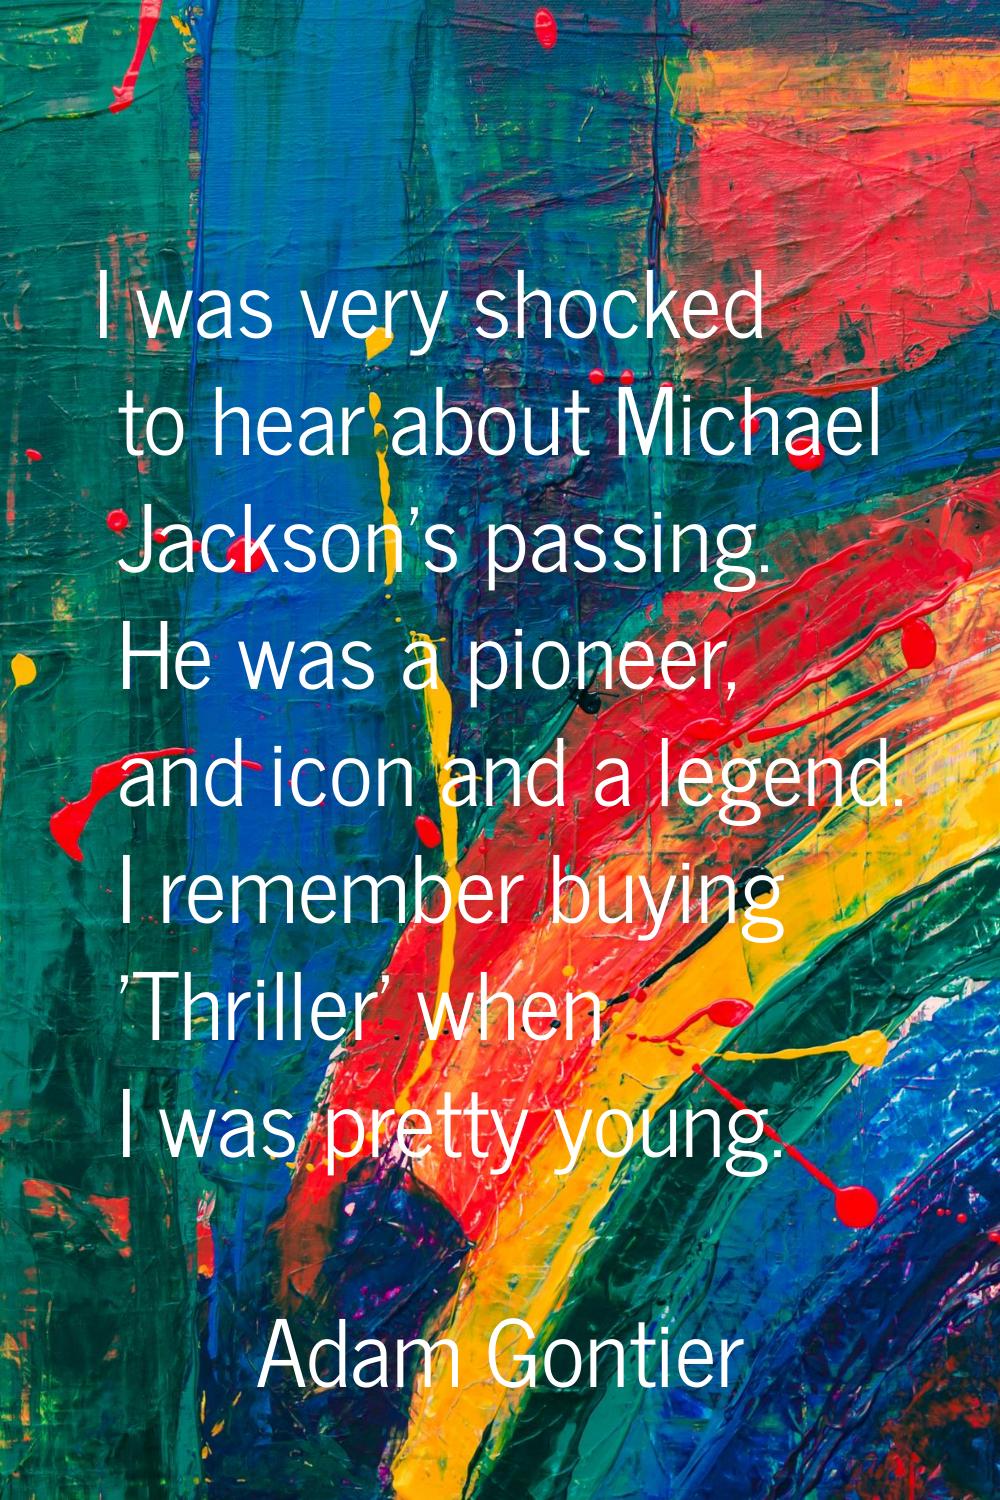 I was very shocked to hear about Michael Jackson's passing. He was a pioneer, and icon and a legend